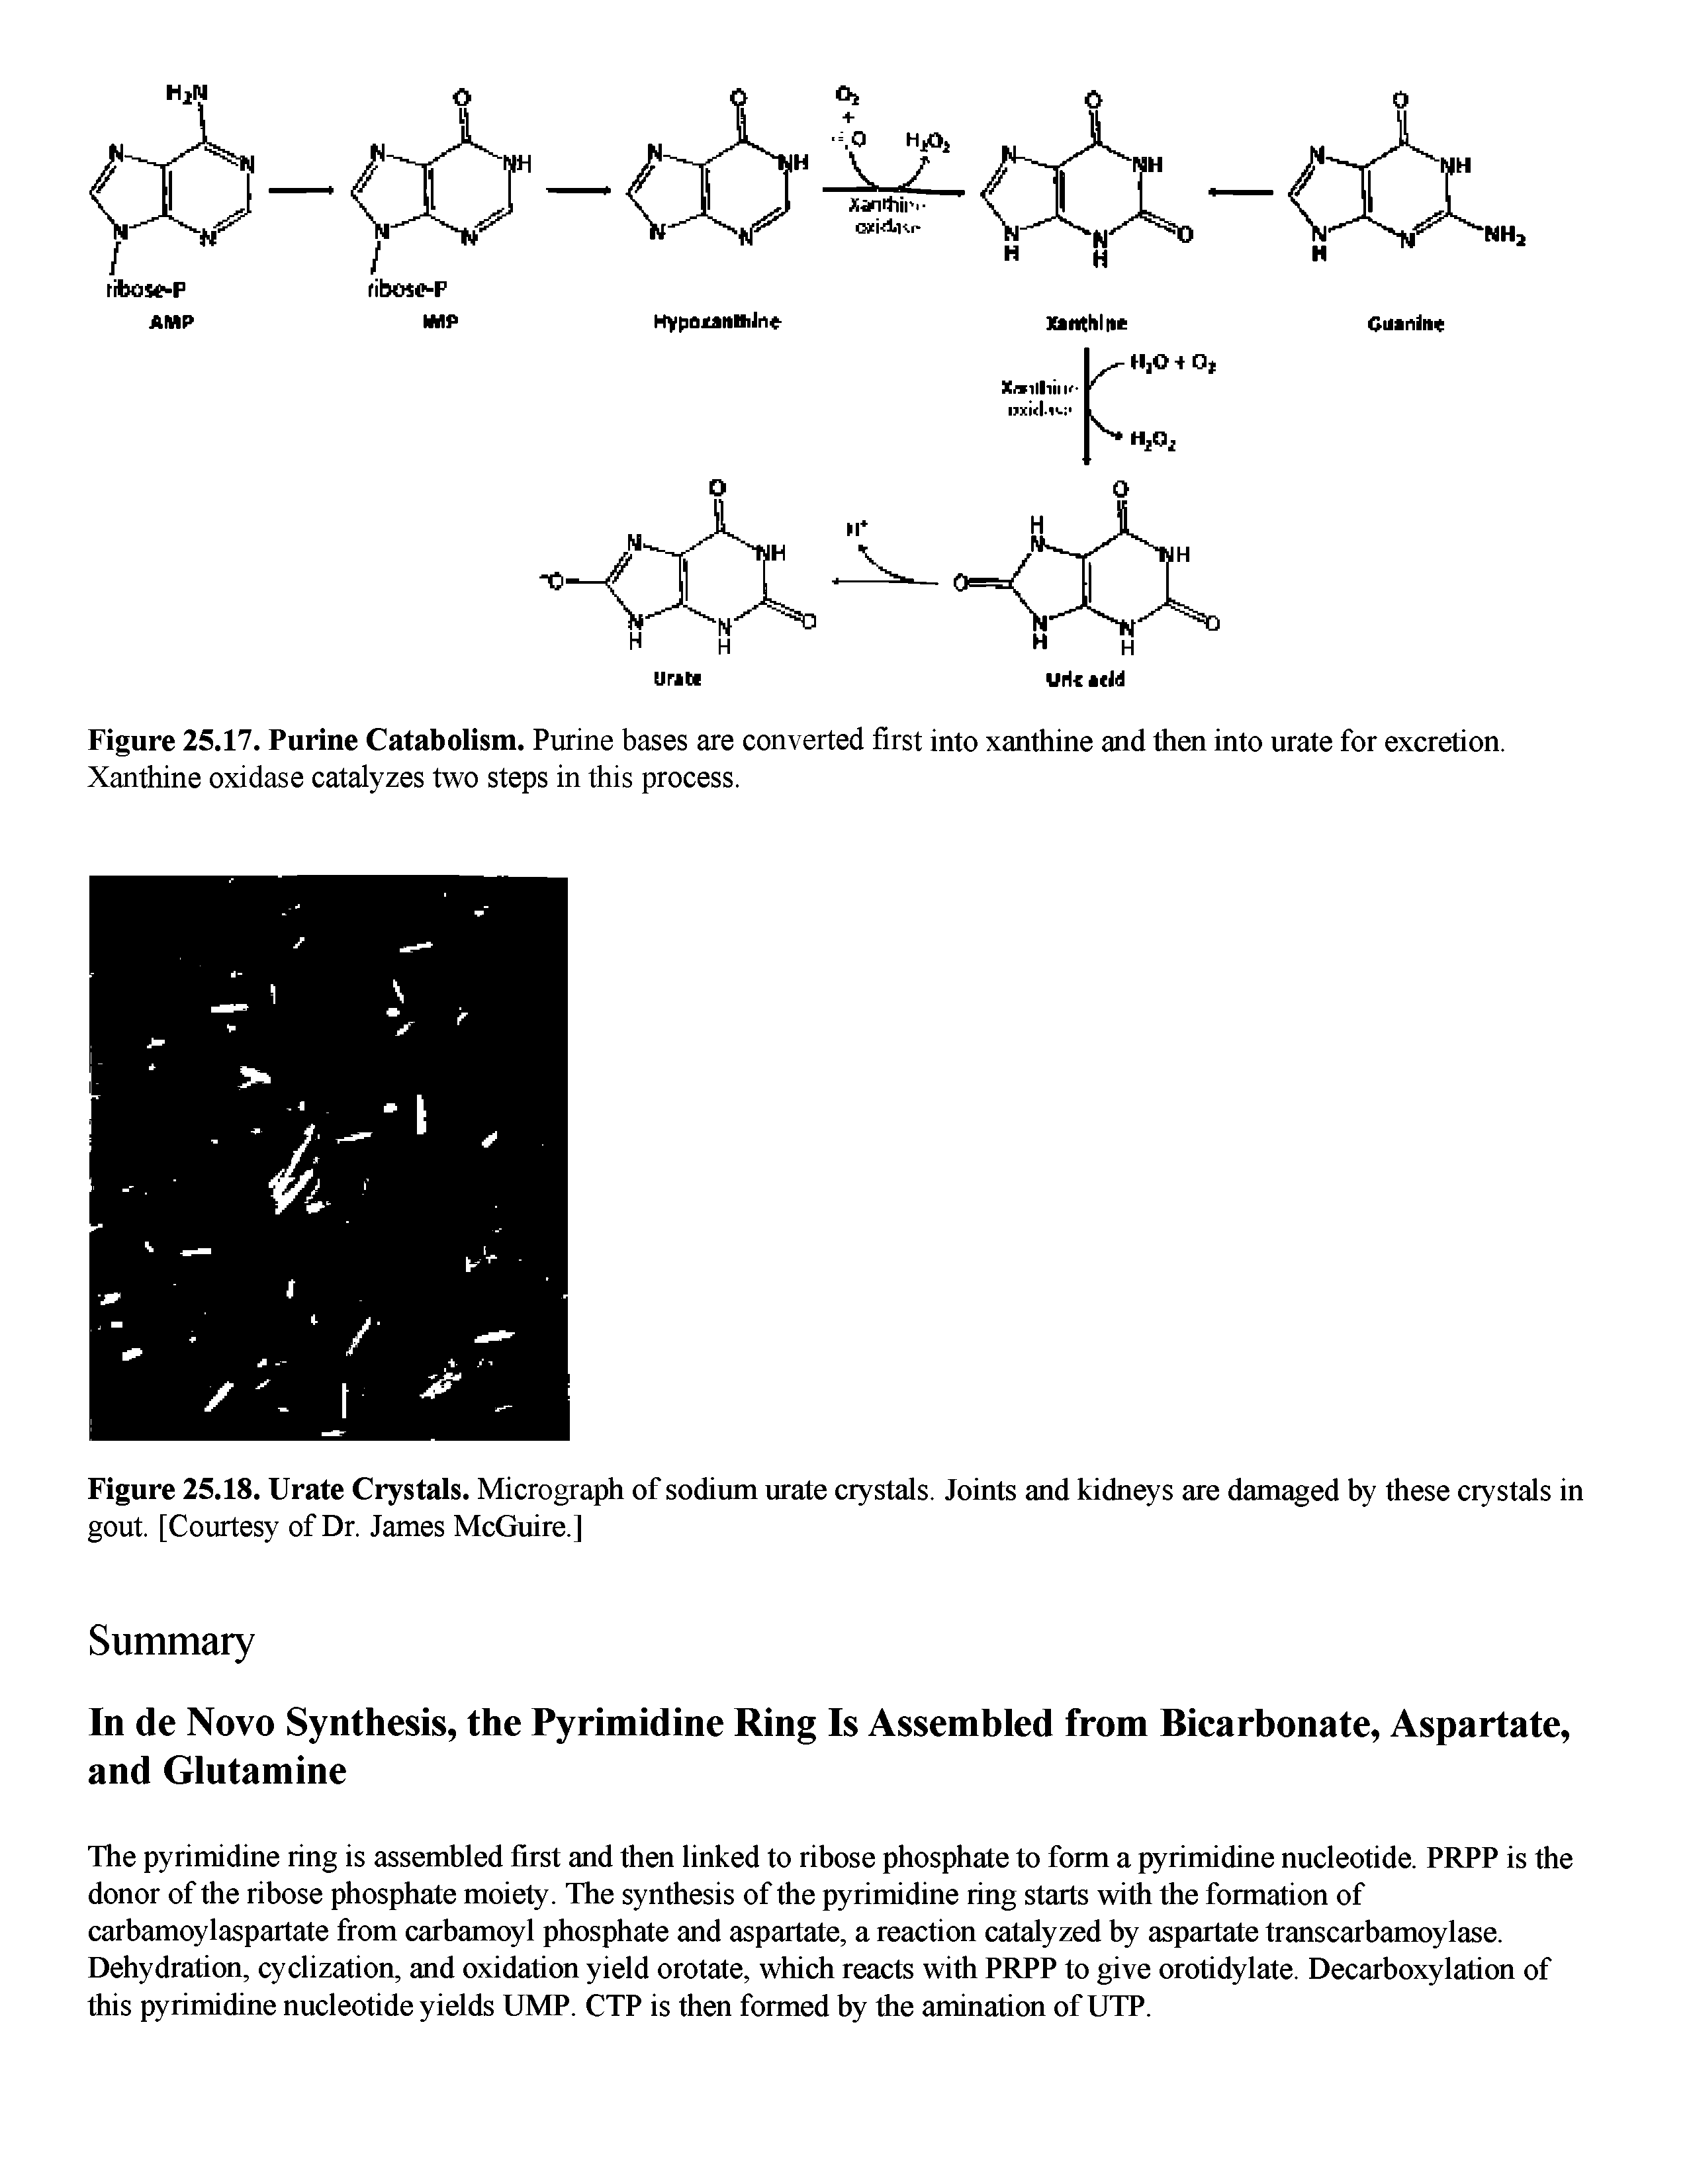 Figure 25.17. Purine Catabolism. Purine bases are converted first into xanthine and then into urate for excretion. Xanthine oxidase catalyzes two steps in this process.